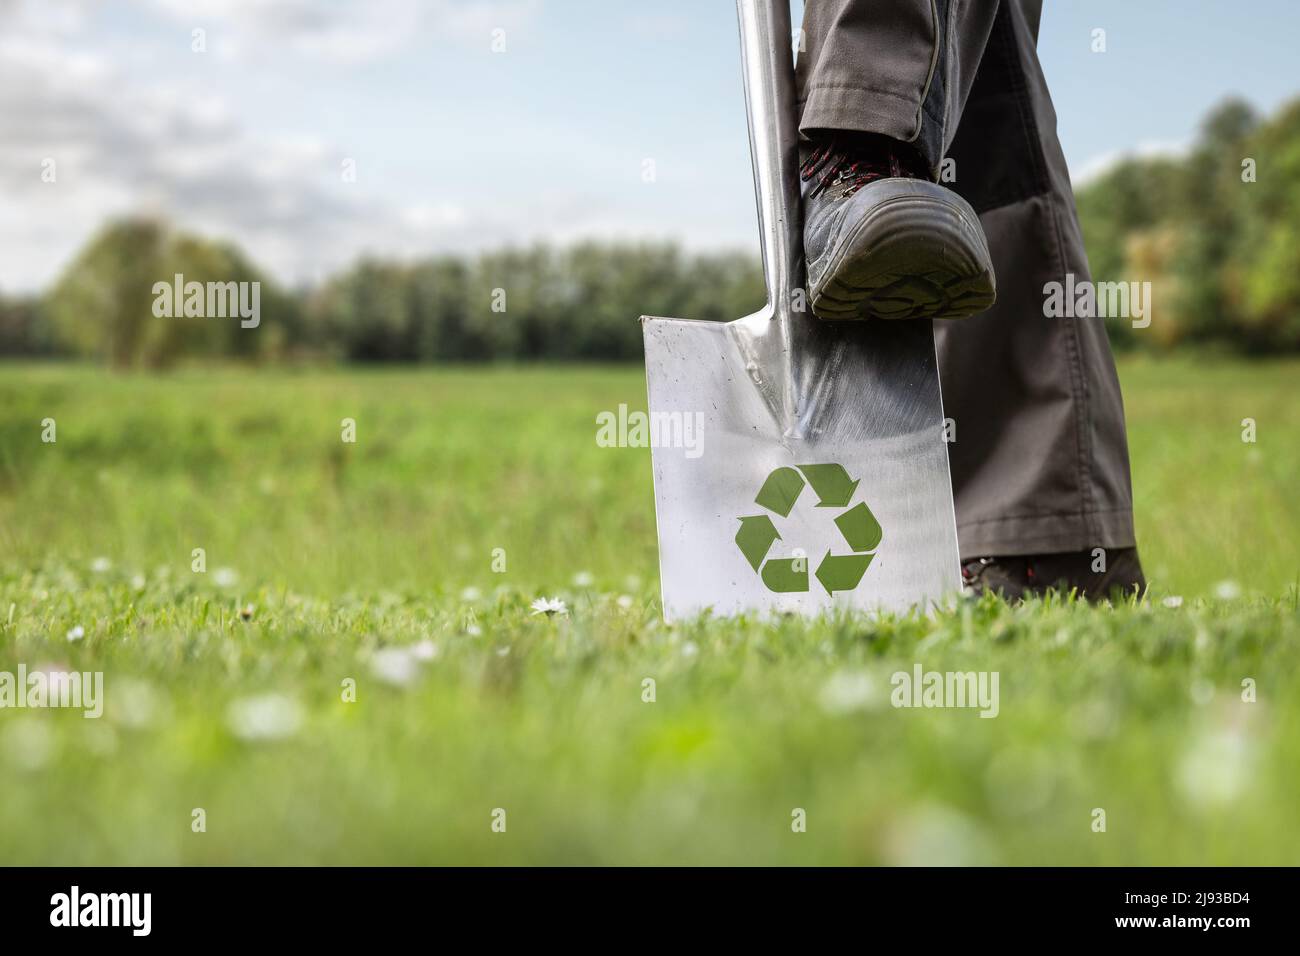 Groundbreaking ceremony with a sustainability symbol on the spade Stock Photo